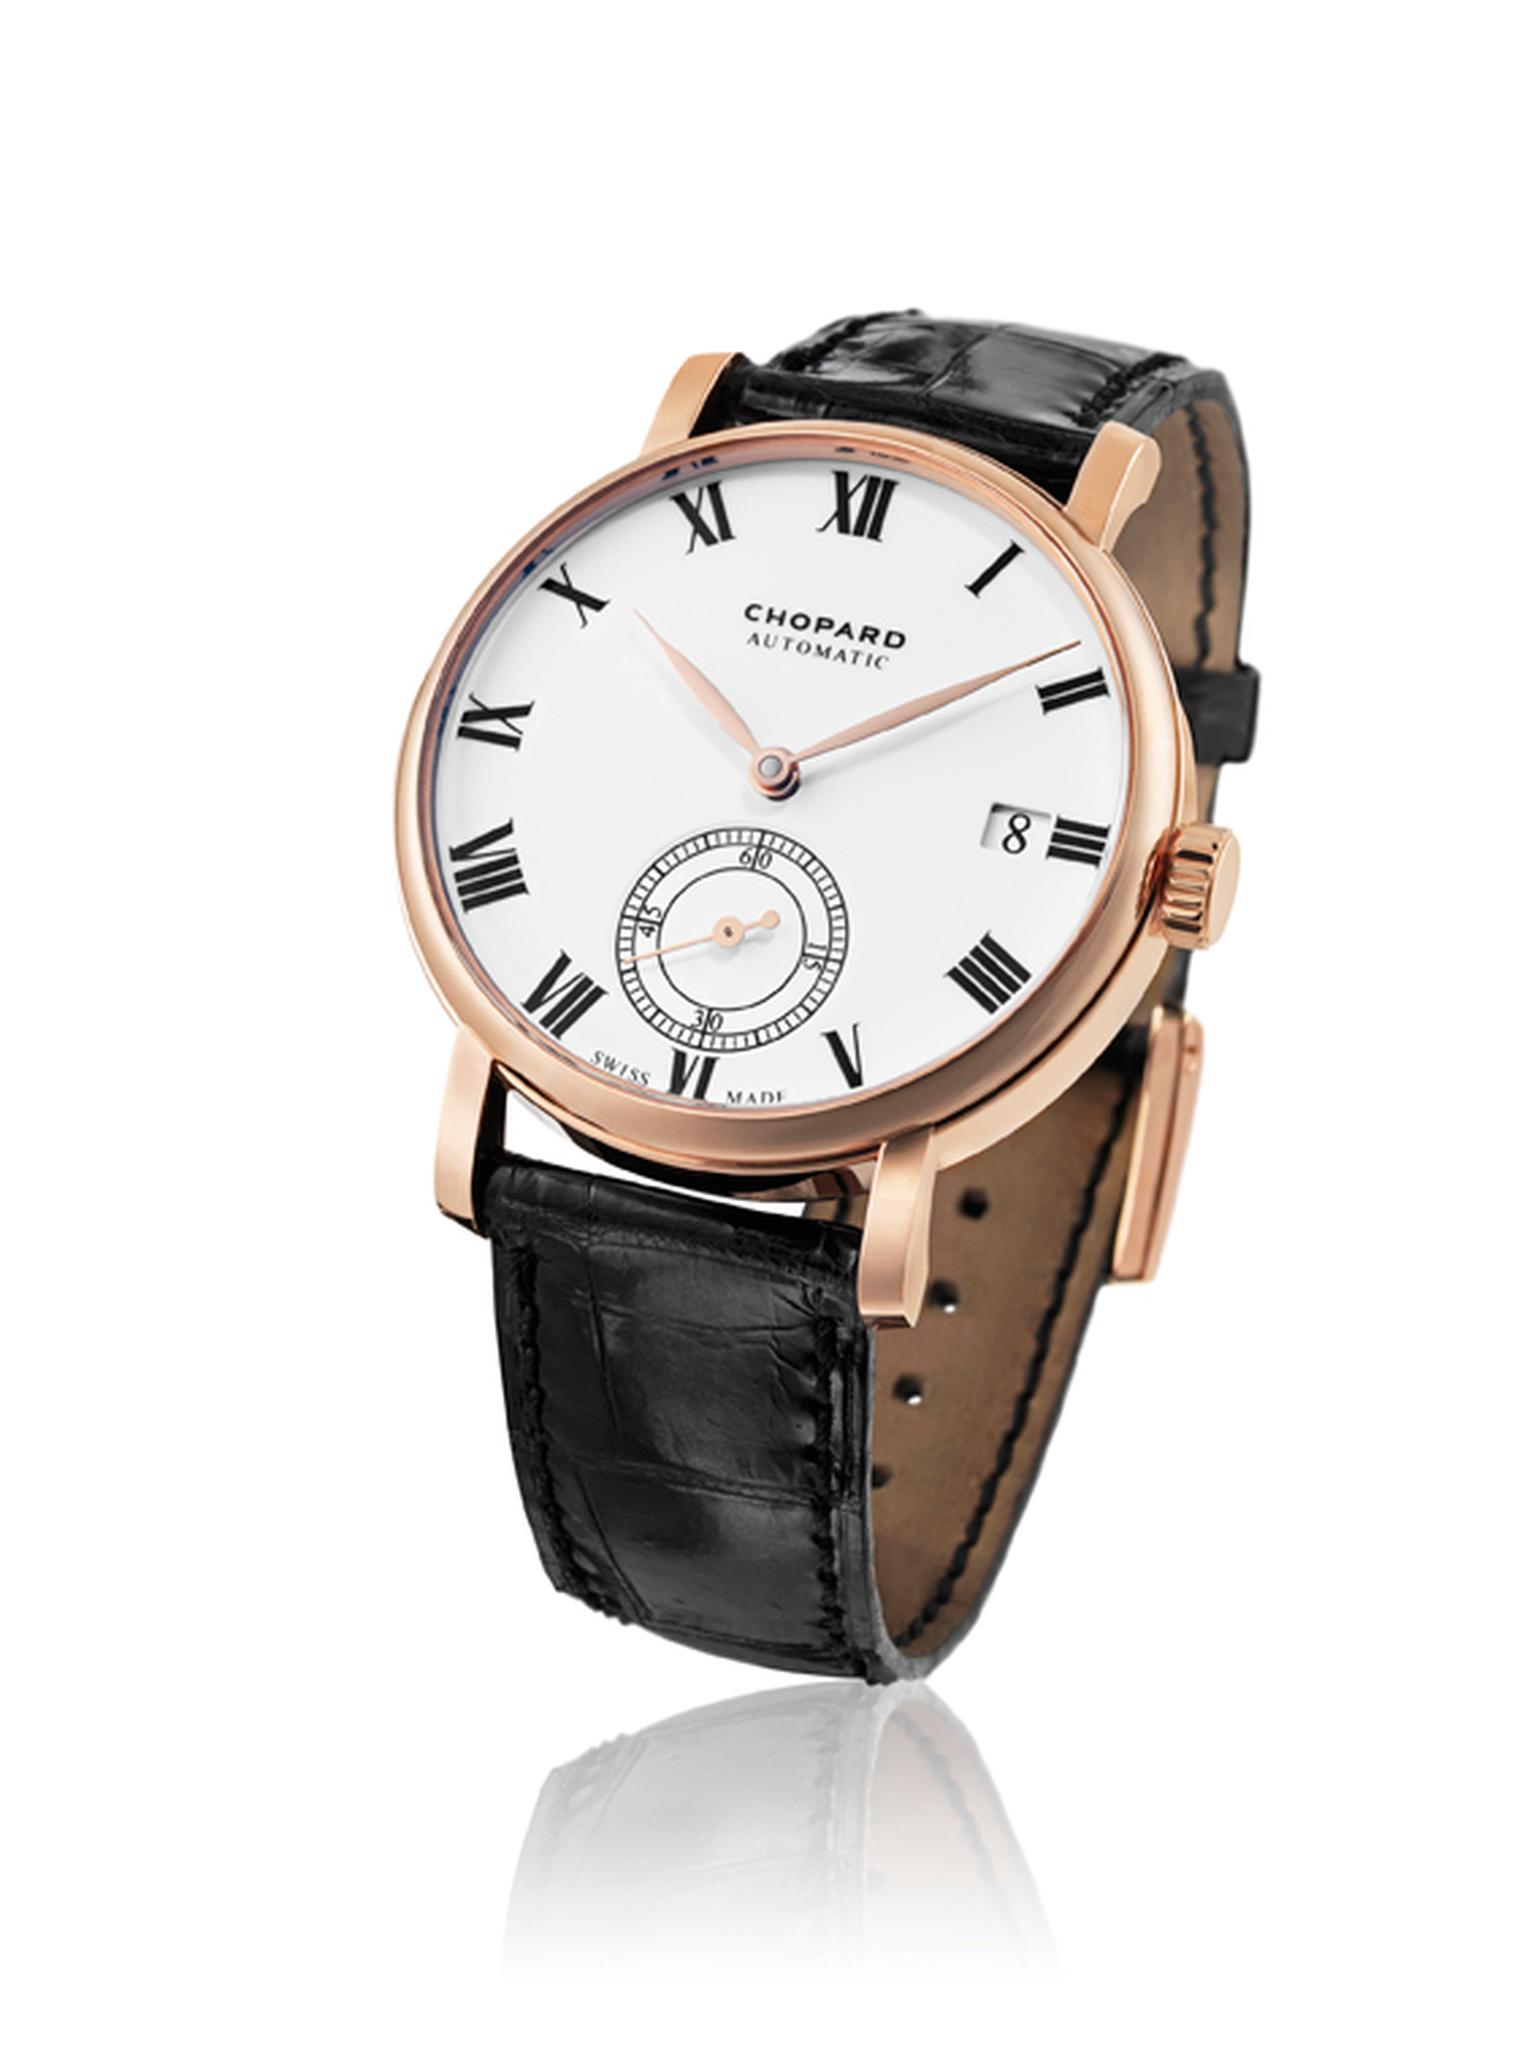 The Chopard Classic Manufacture watch in rose gold worn by Eddie Redmayne to the Golden Globes 2015. The movement, produced entirely by Chopard, is a mechanical self-winding calibre with a 60-hour power reserve.